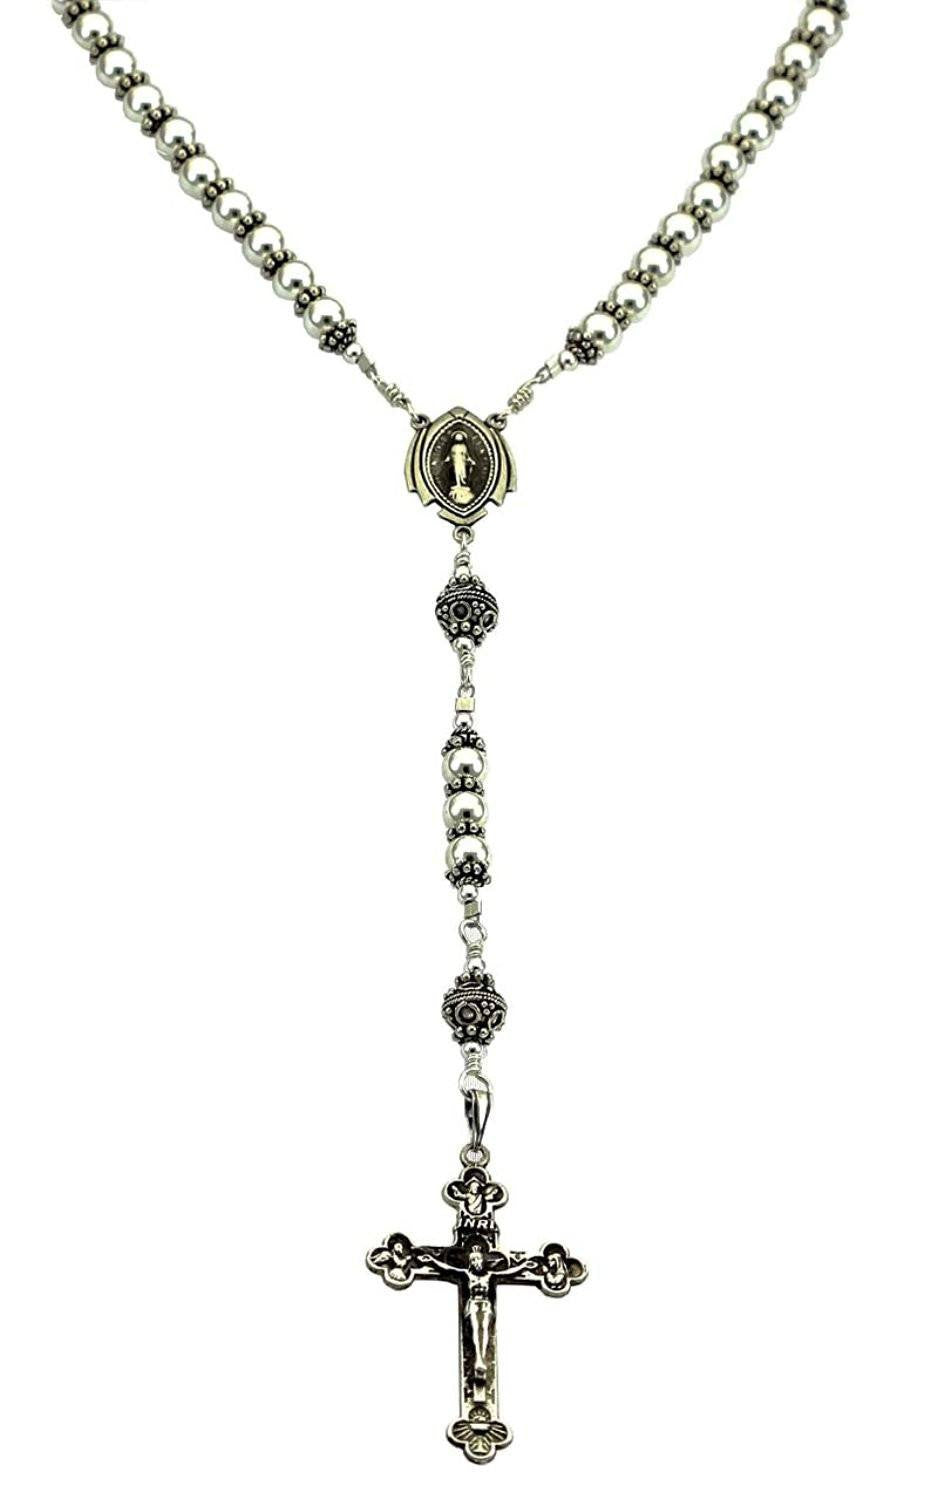 Sterling Silver Rosary Necklace 6mm beads, Crucifix & Miraculous Medal